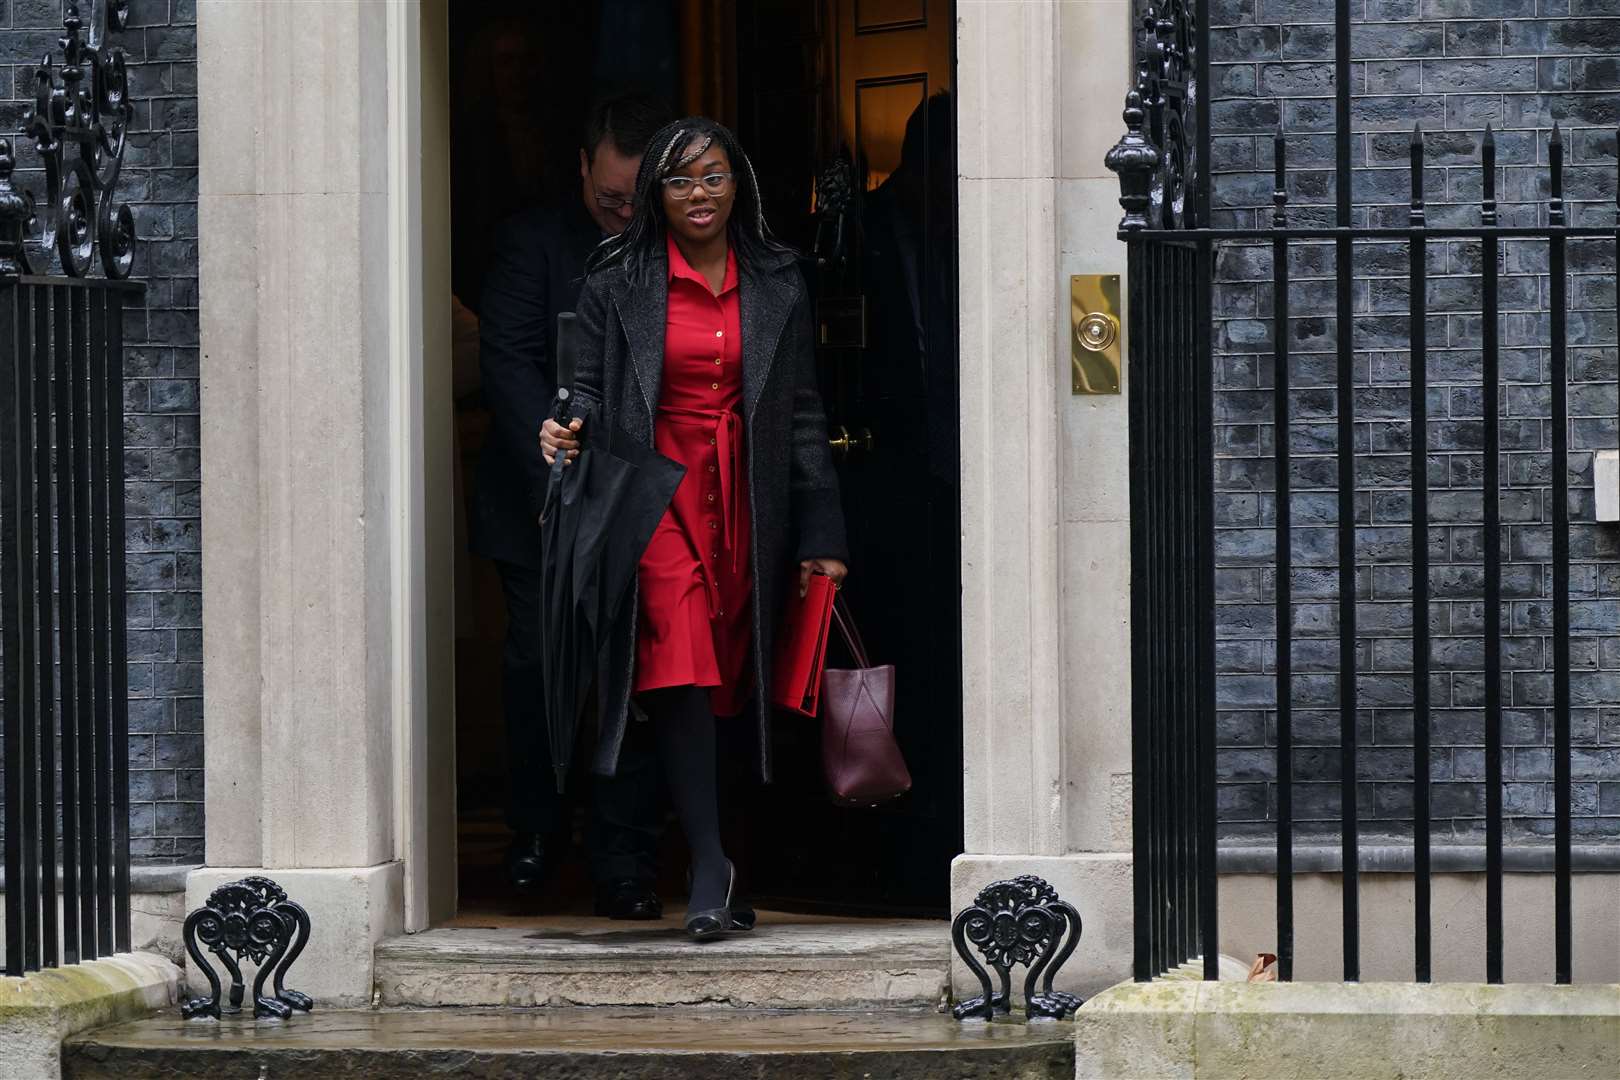 Kemi Badenoch will use her speech to take aim at Labour’s plans (Yui Mok/PA)